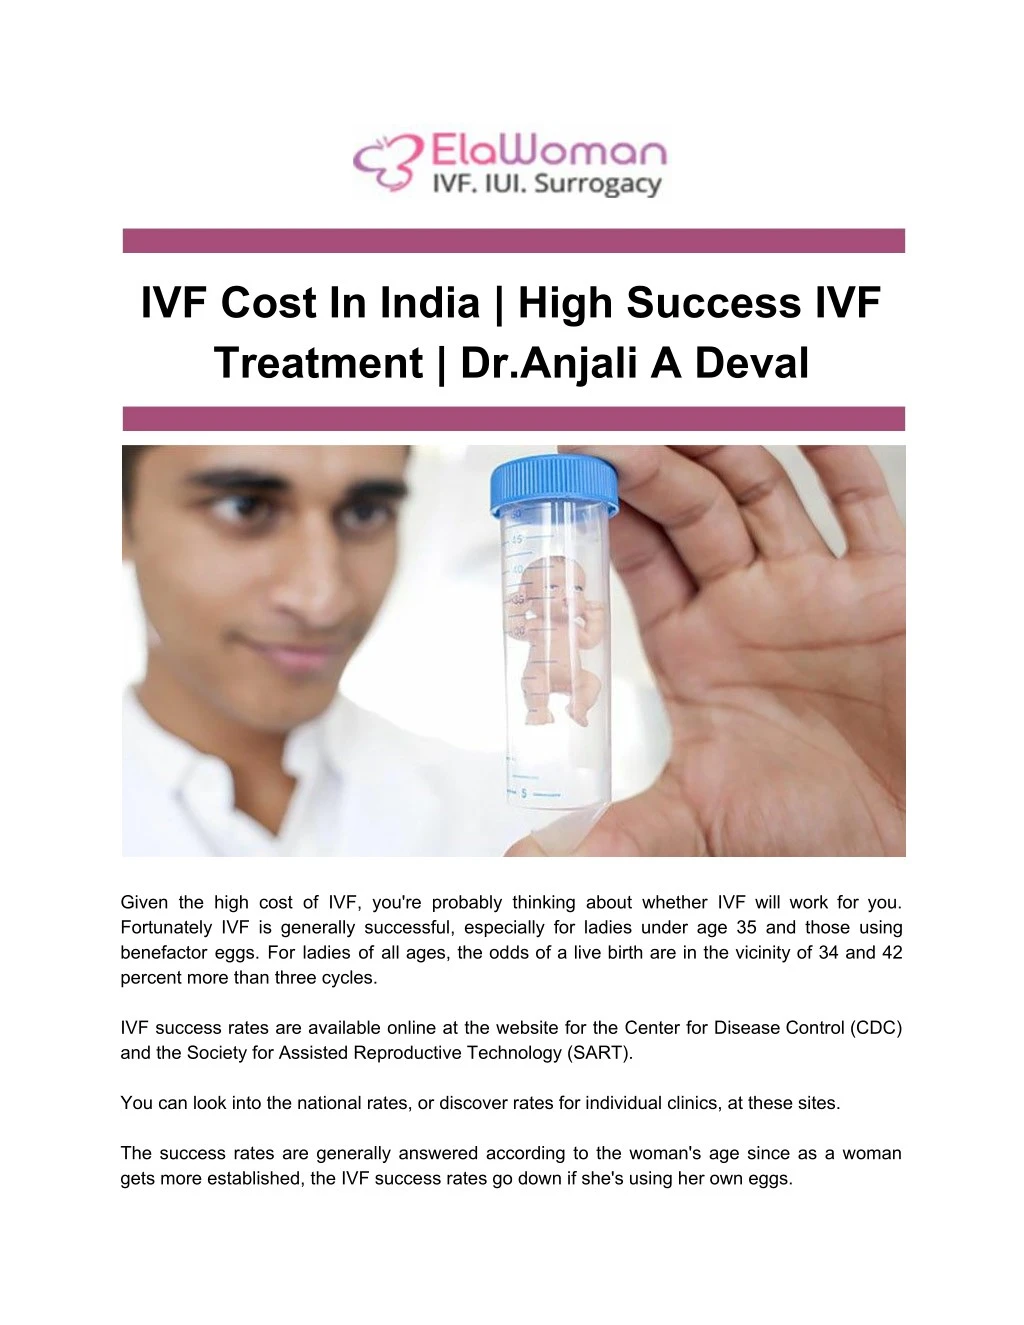 ivf cost in india high success ivf treatment